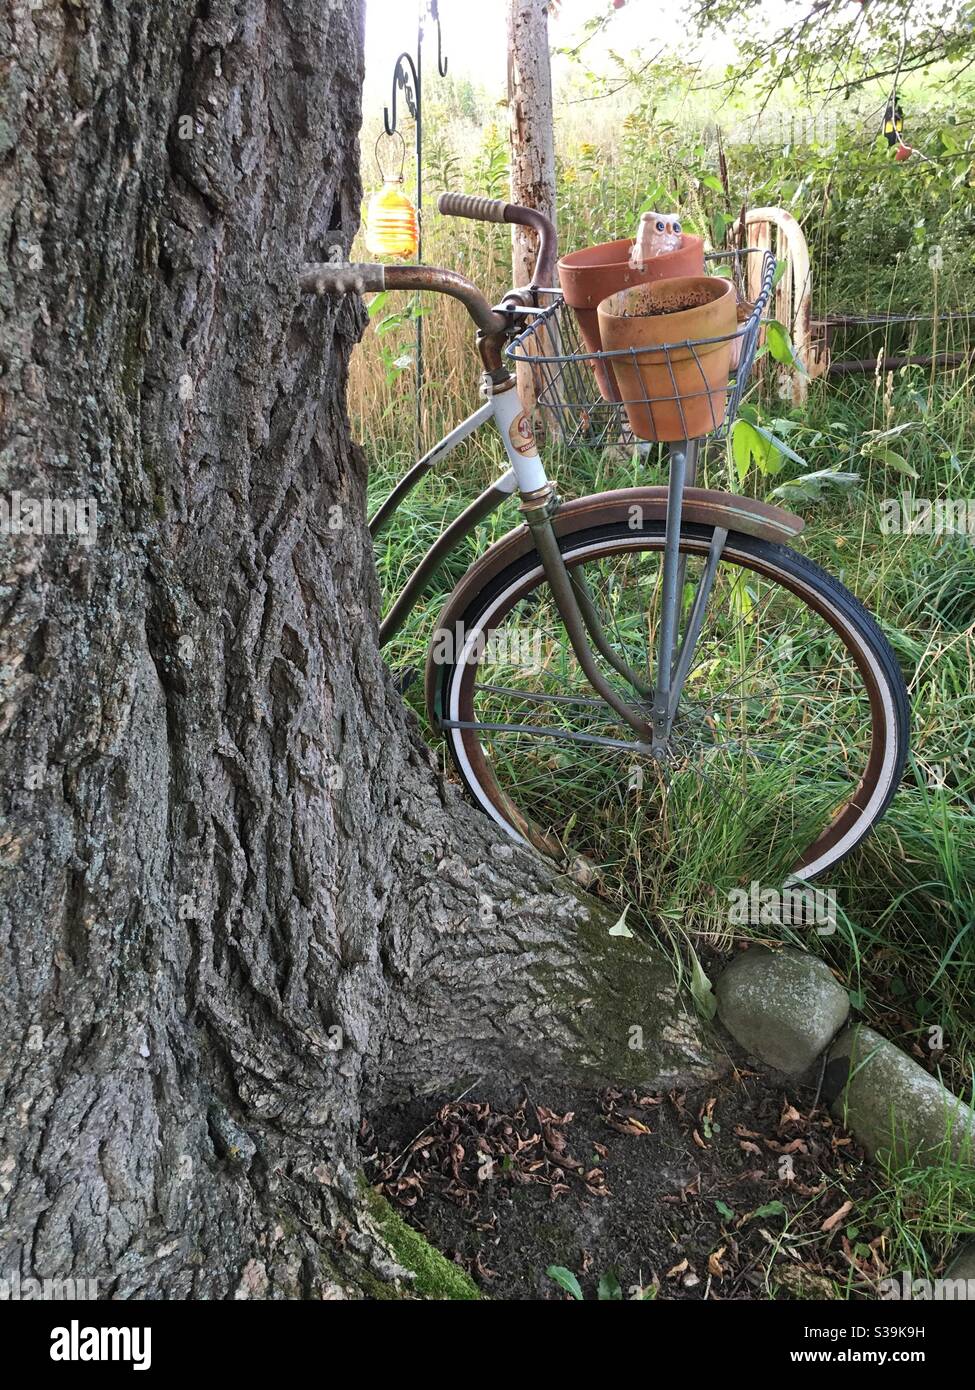 vintage bike with basket leaning on tree Stock Photo